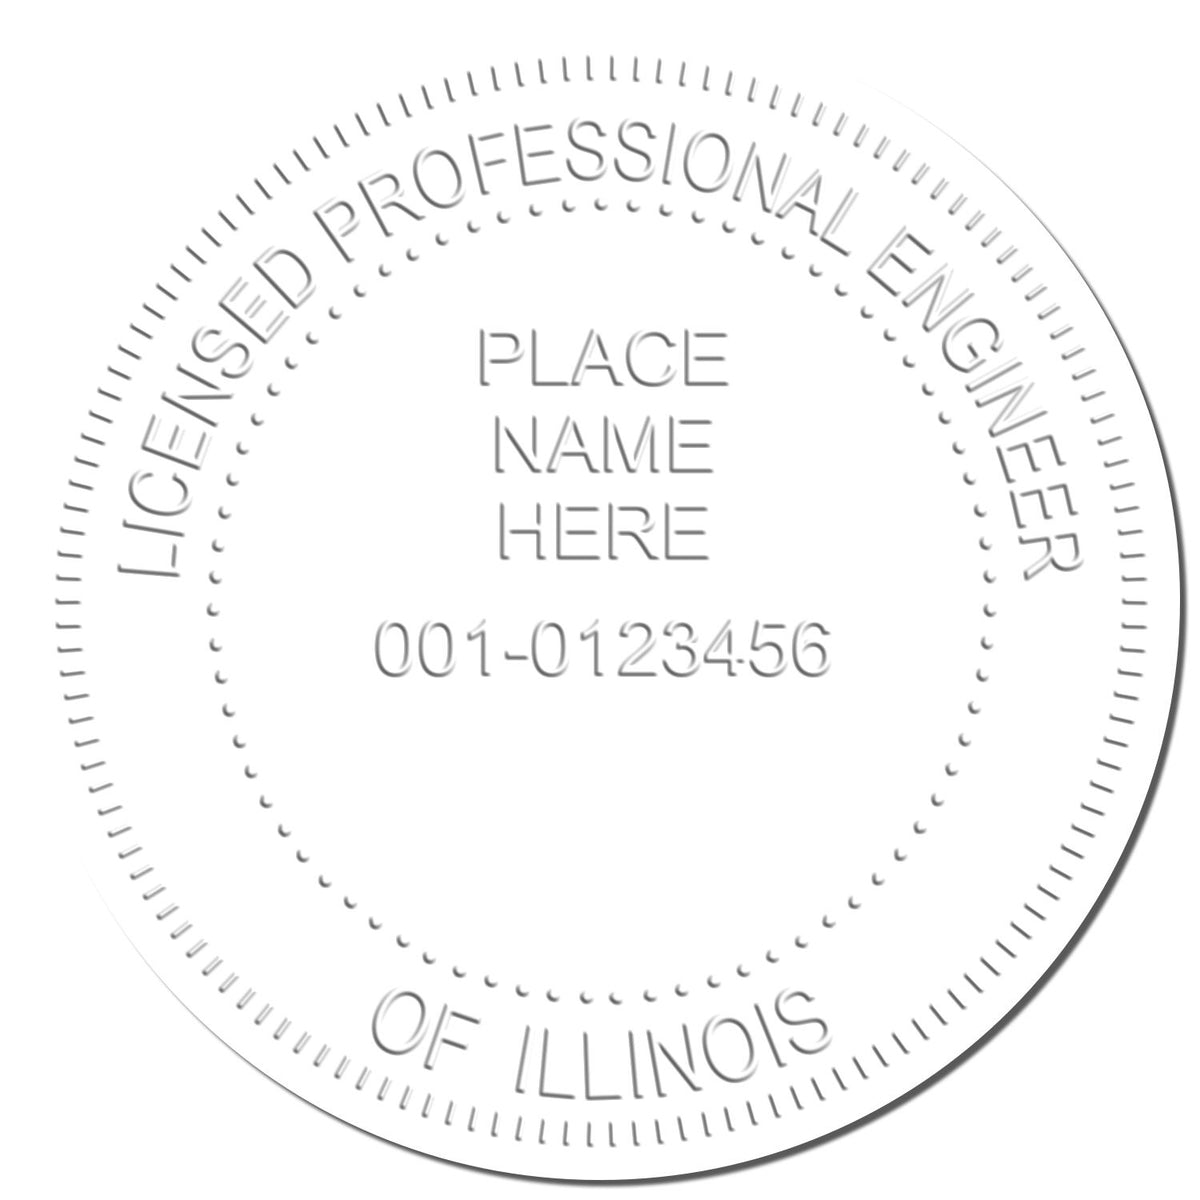 This paper is stamped with a sample imprint of the Gift Illinois Engineer Seal, signifying its quality and reliability.